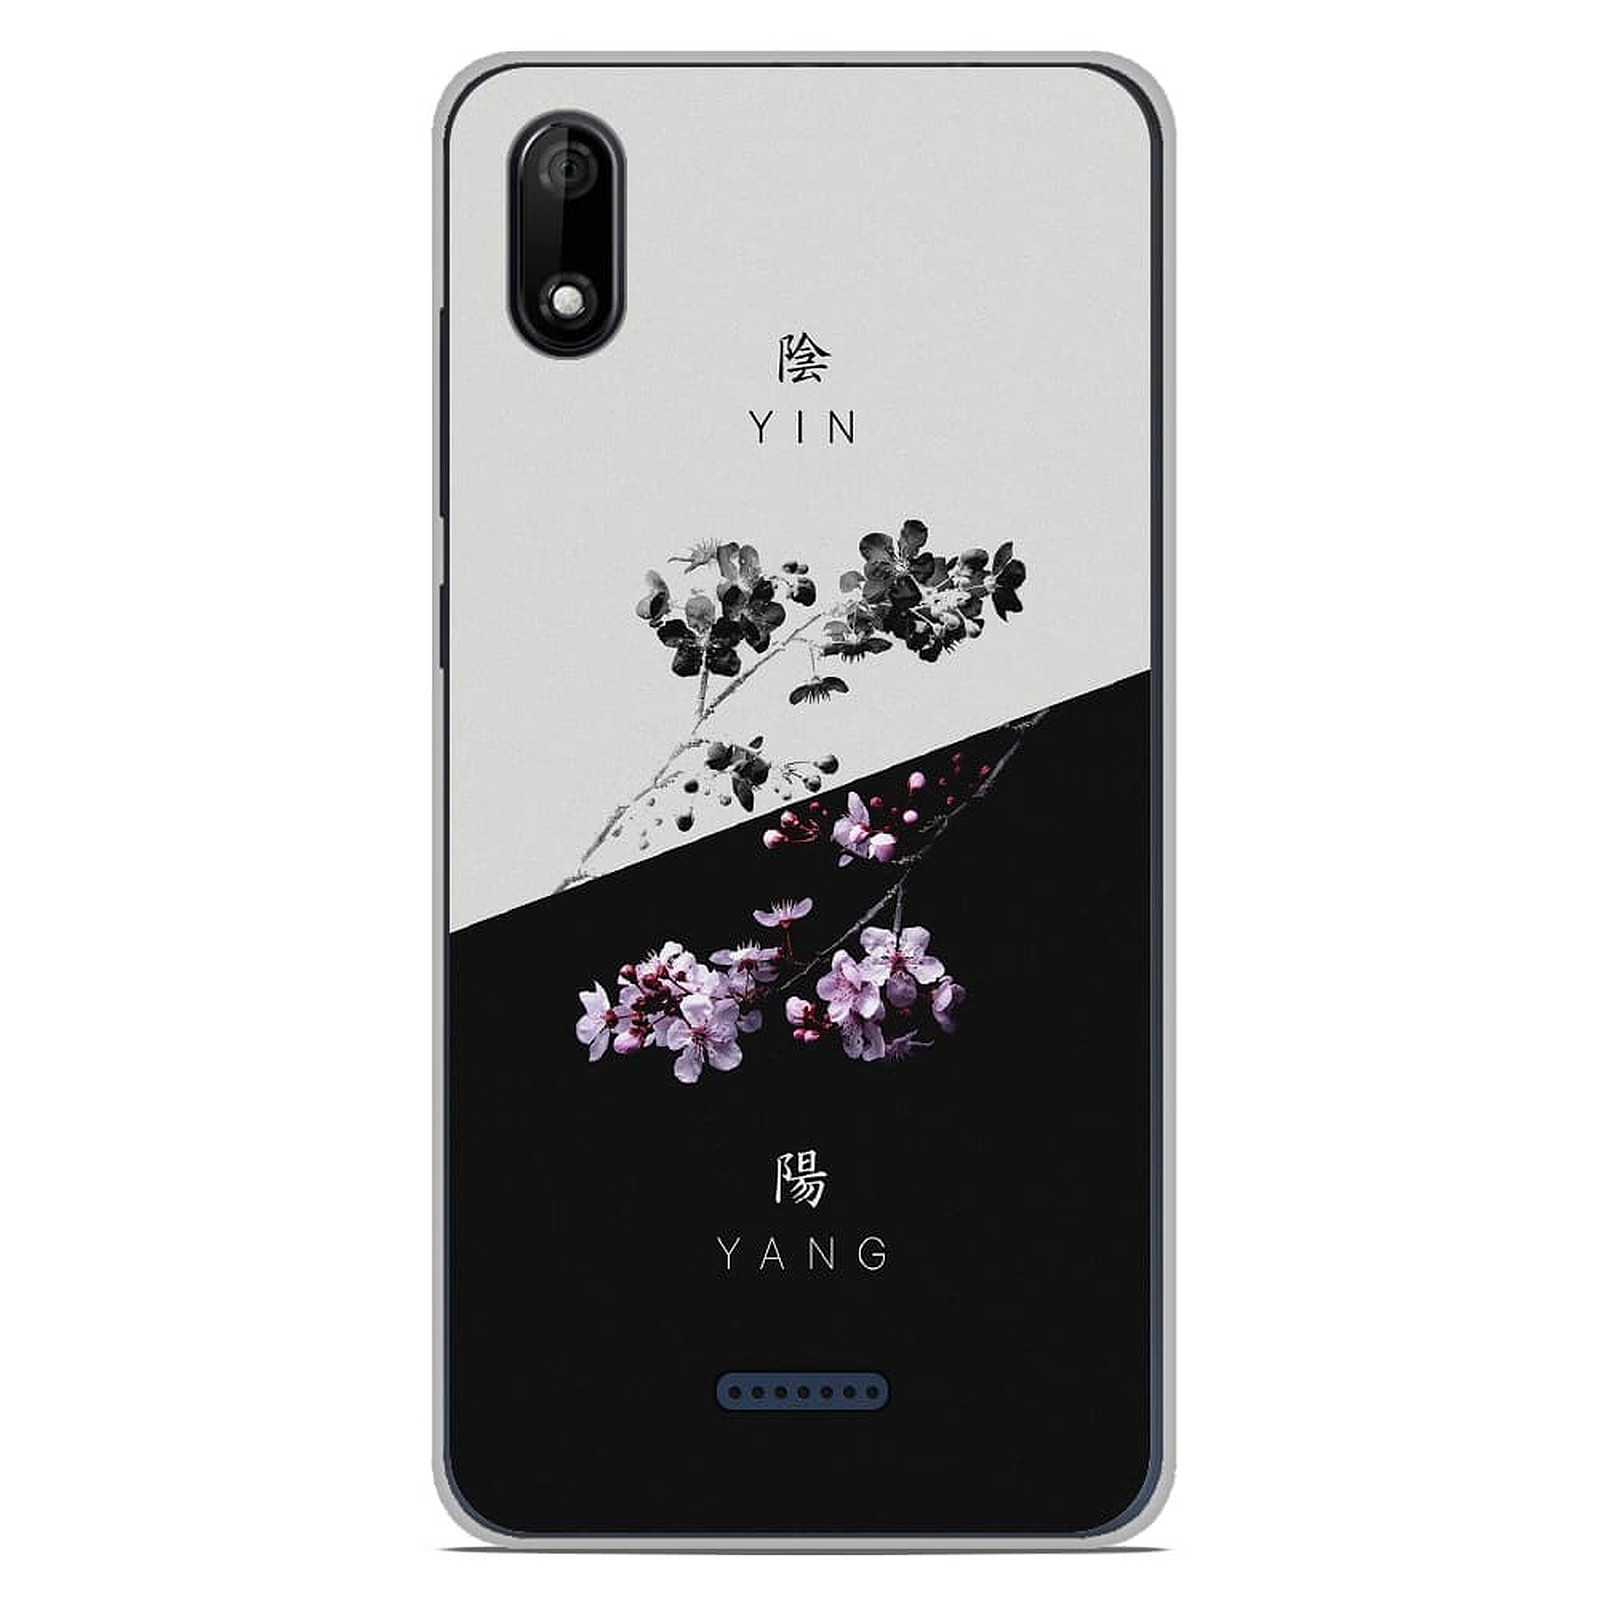 1001 Coques Coque silicone gel Wiko Y60 motif Yin et Yang - Coque telephone 1001Coques